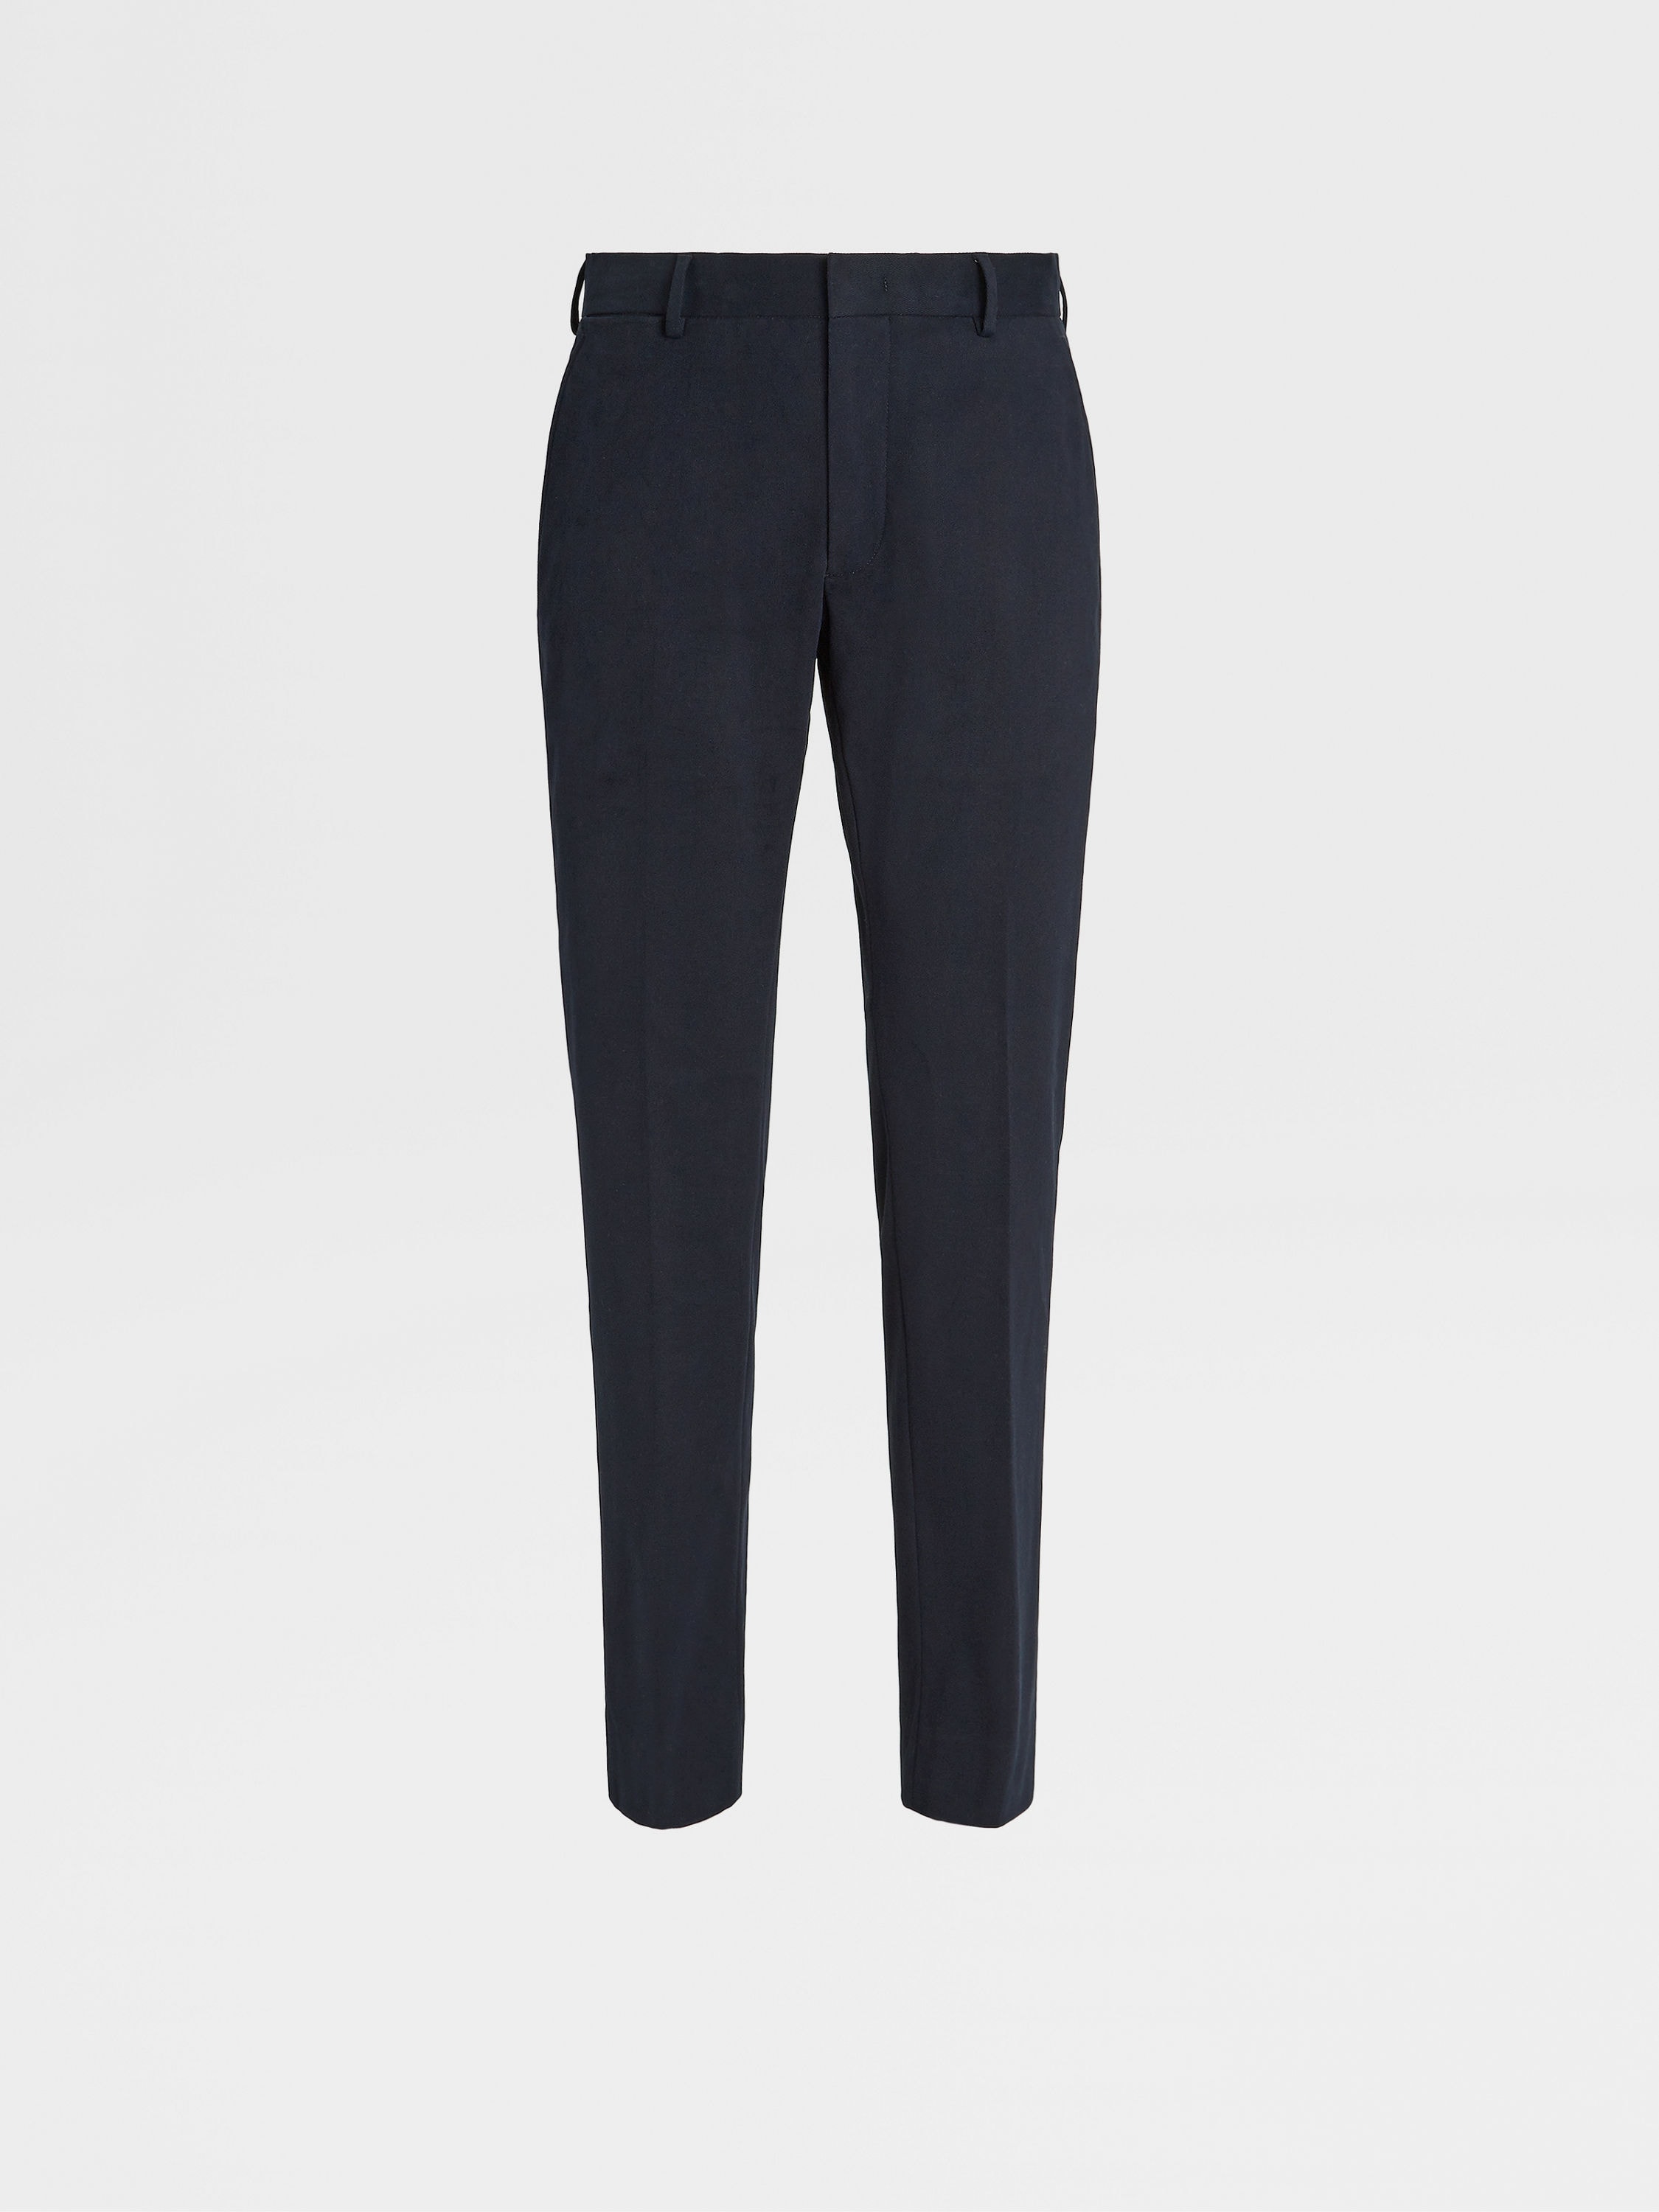 Navy Blue Winter Crossover Cotton Pants FW23 23093659 | Zegna GB